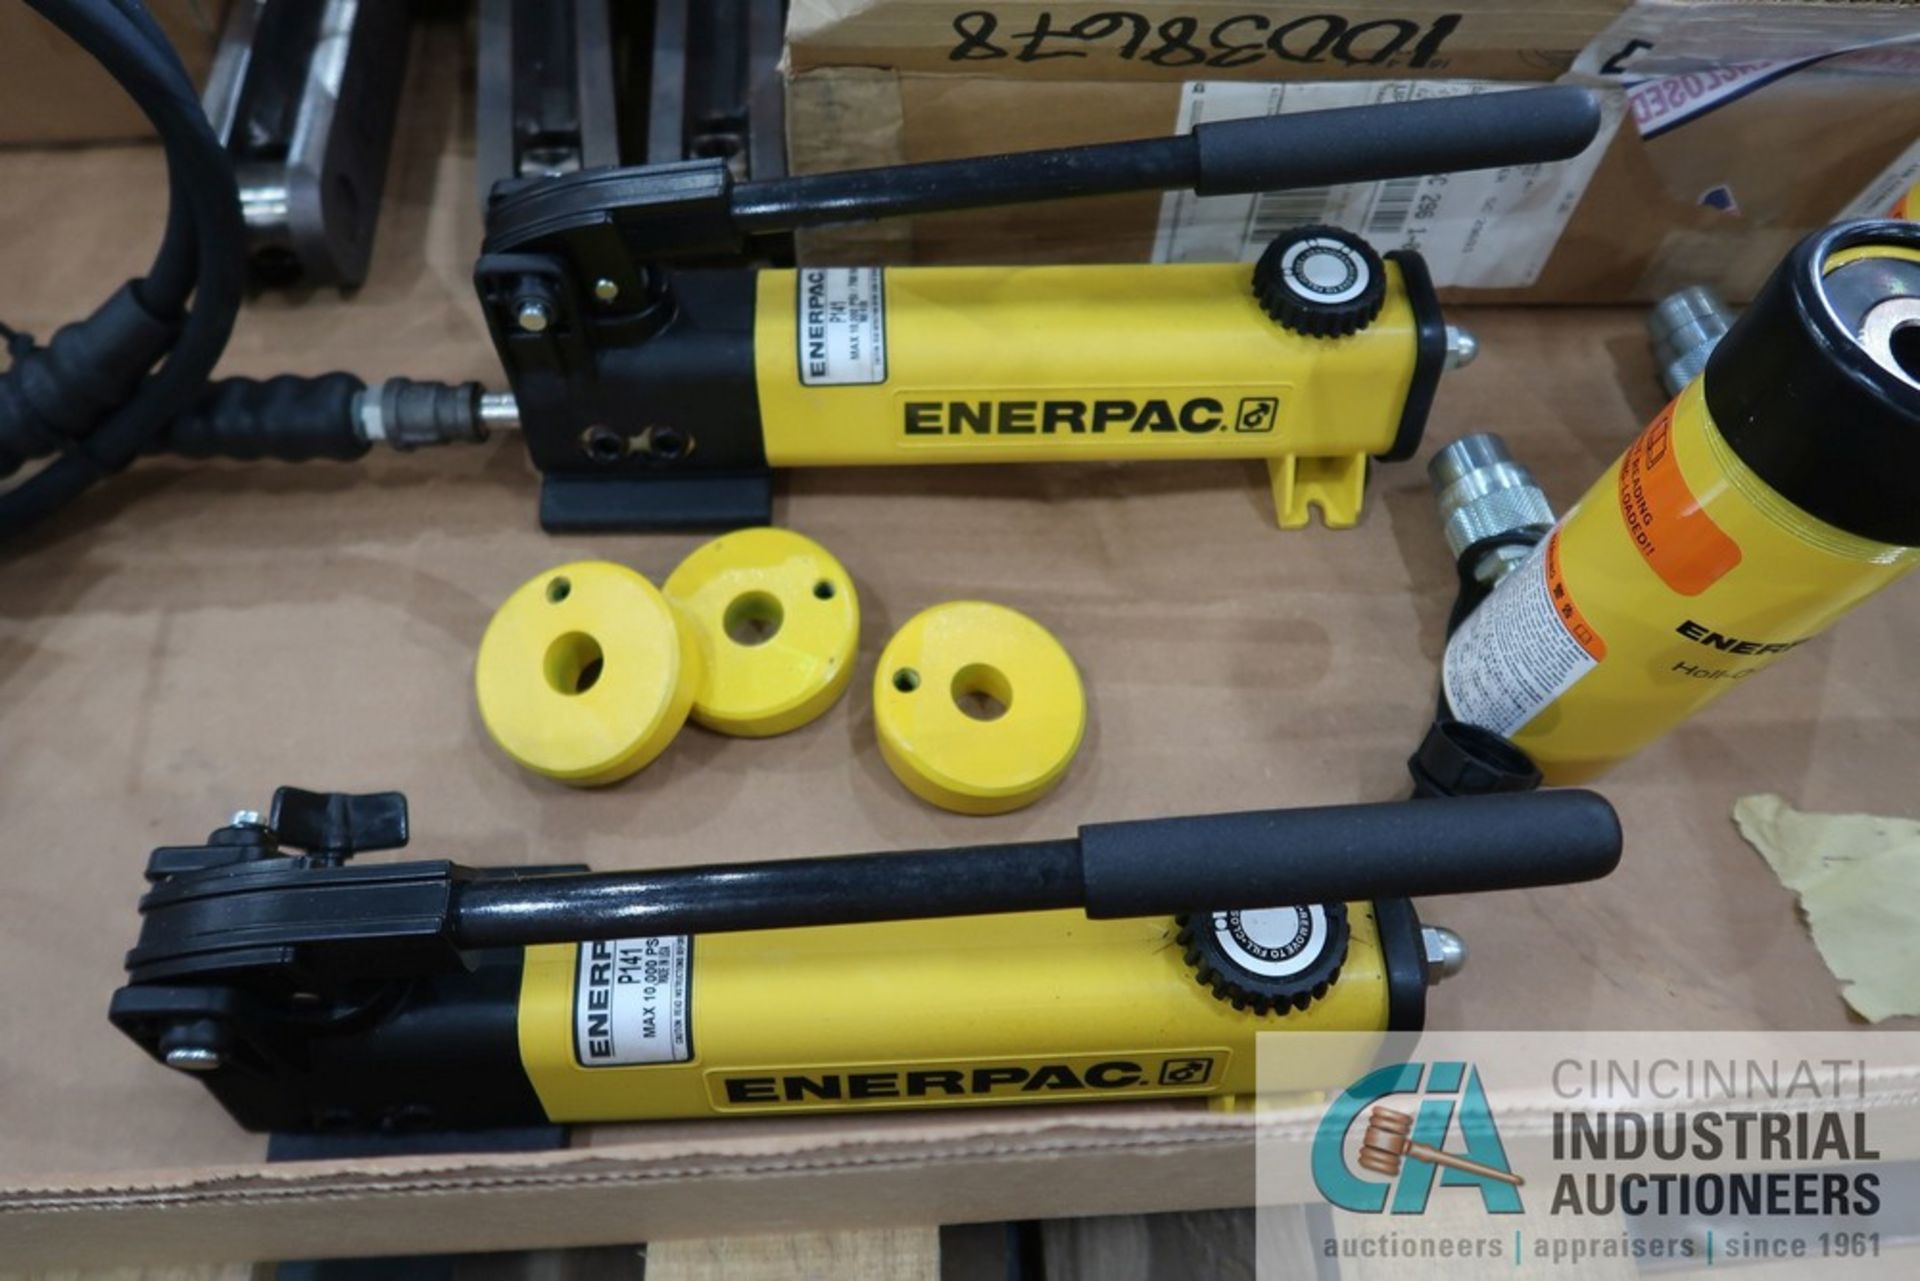 10,000 PSI MAX ENERPAC HAND HYDRAULIC PUMPS WITH (2) 12 TON CAP ENERPAC HOLL-O-RAM CYLINDERS - Image 3 of 4